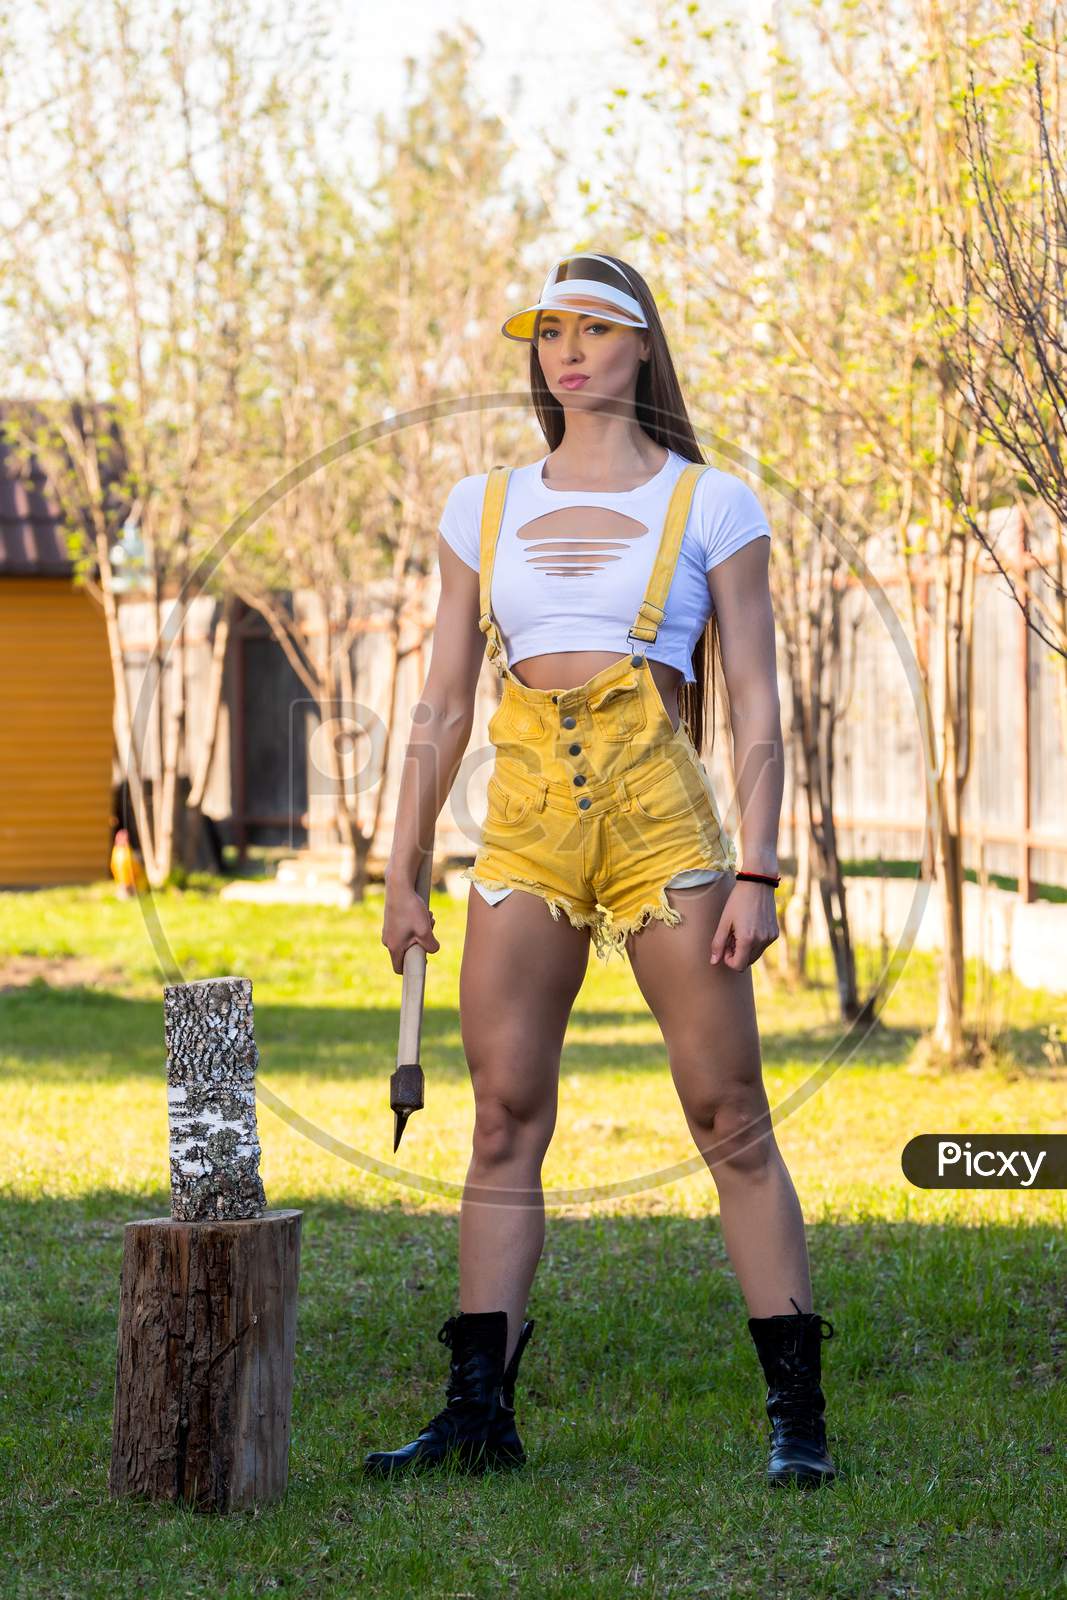 A Sportive Woman Lumberjack Cuts A Tree With A Big Ax. Bodybuilder With An Ax. Fitness Woman With Ax